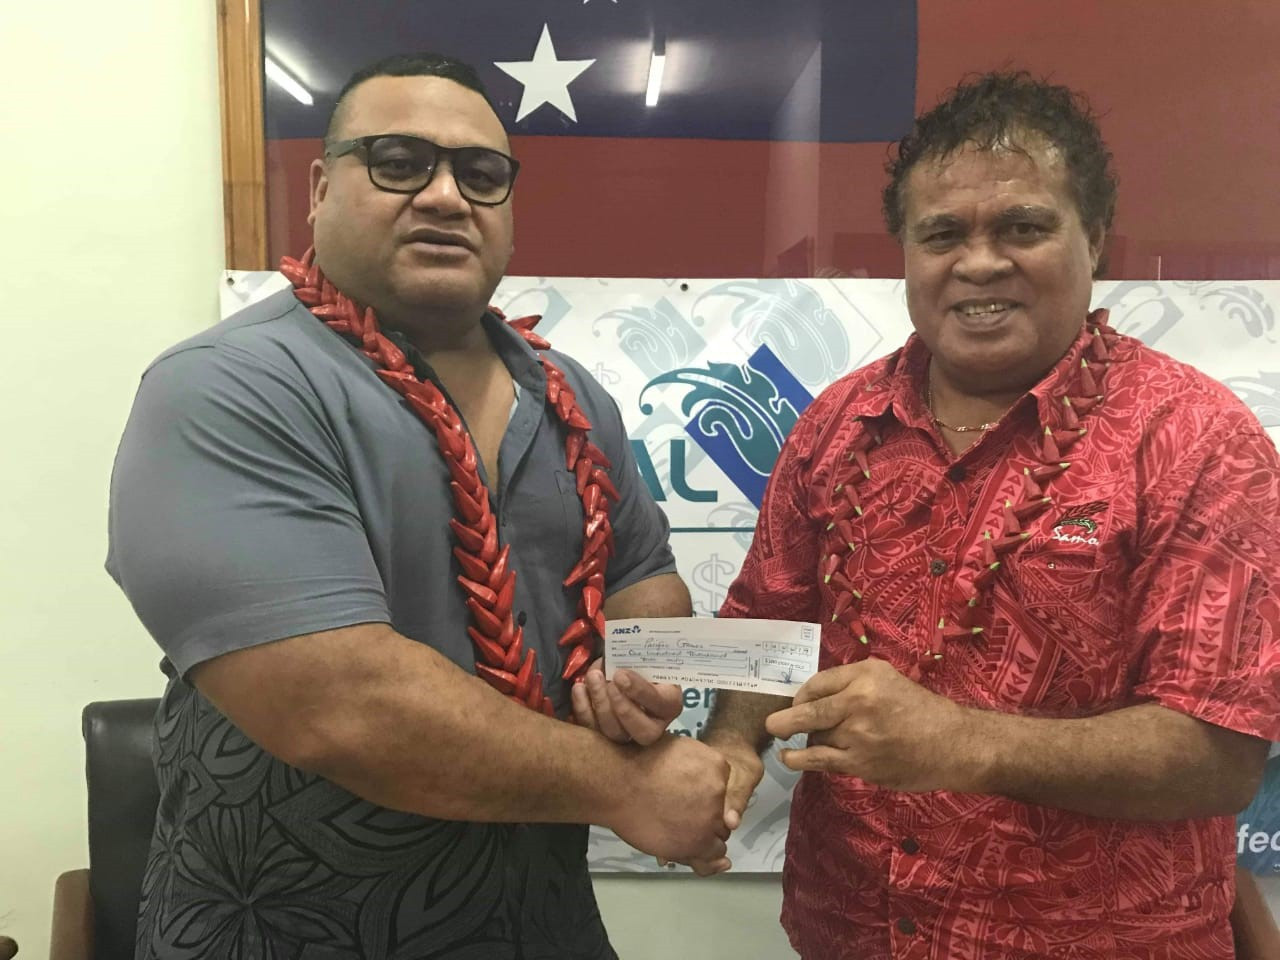 Samoan financial services provider becomes latest local company to sponsor 2019 Pacific Games